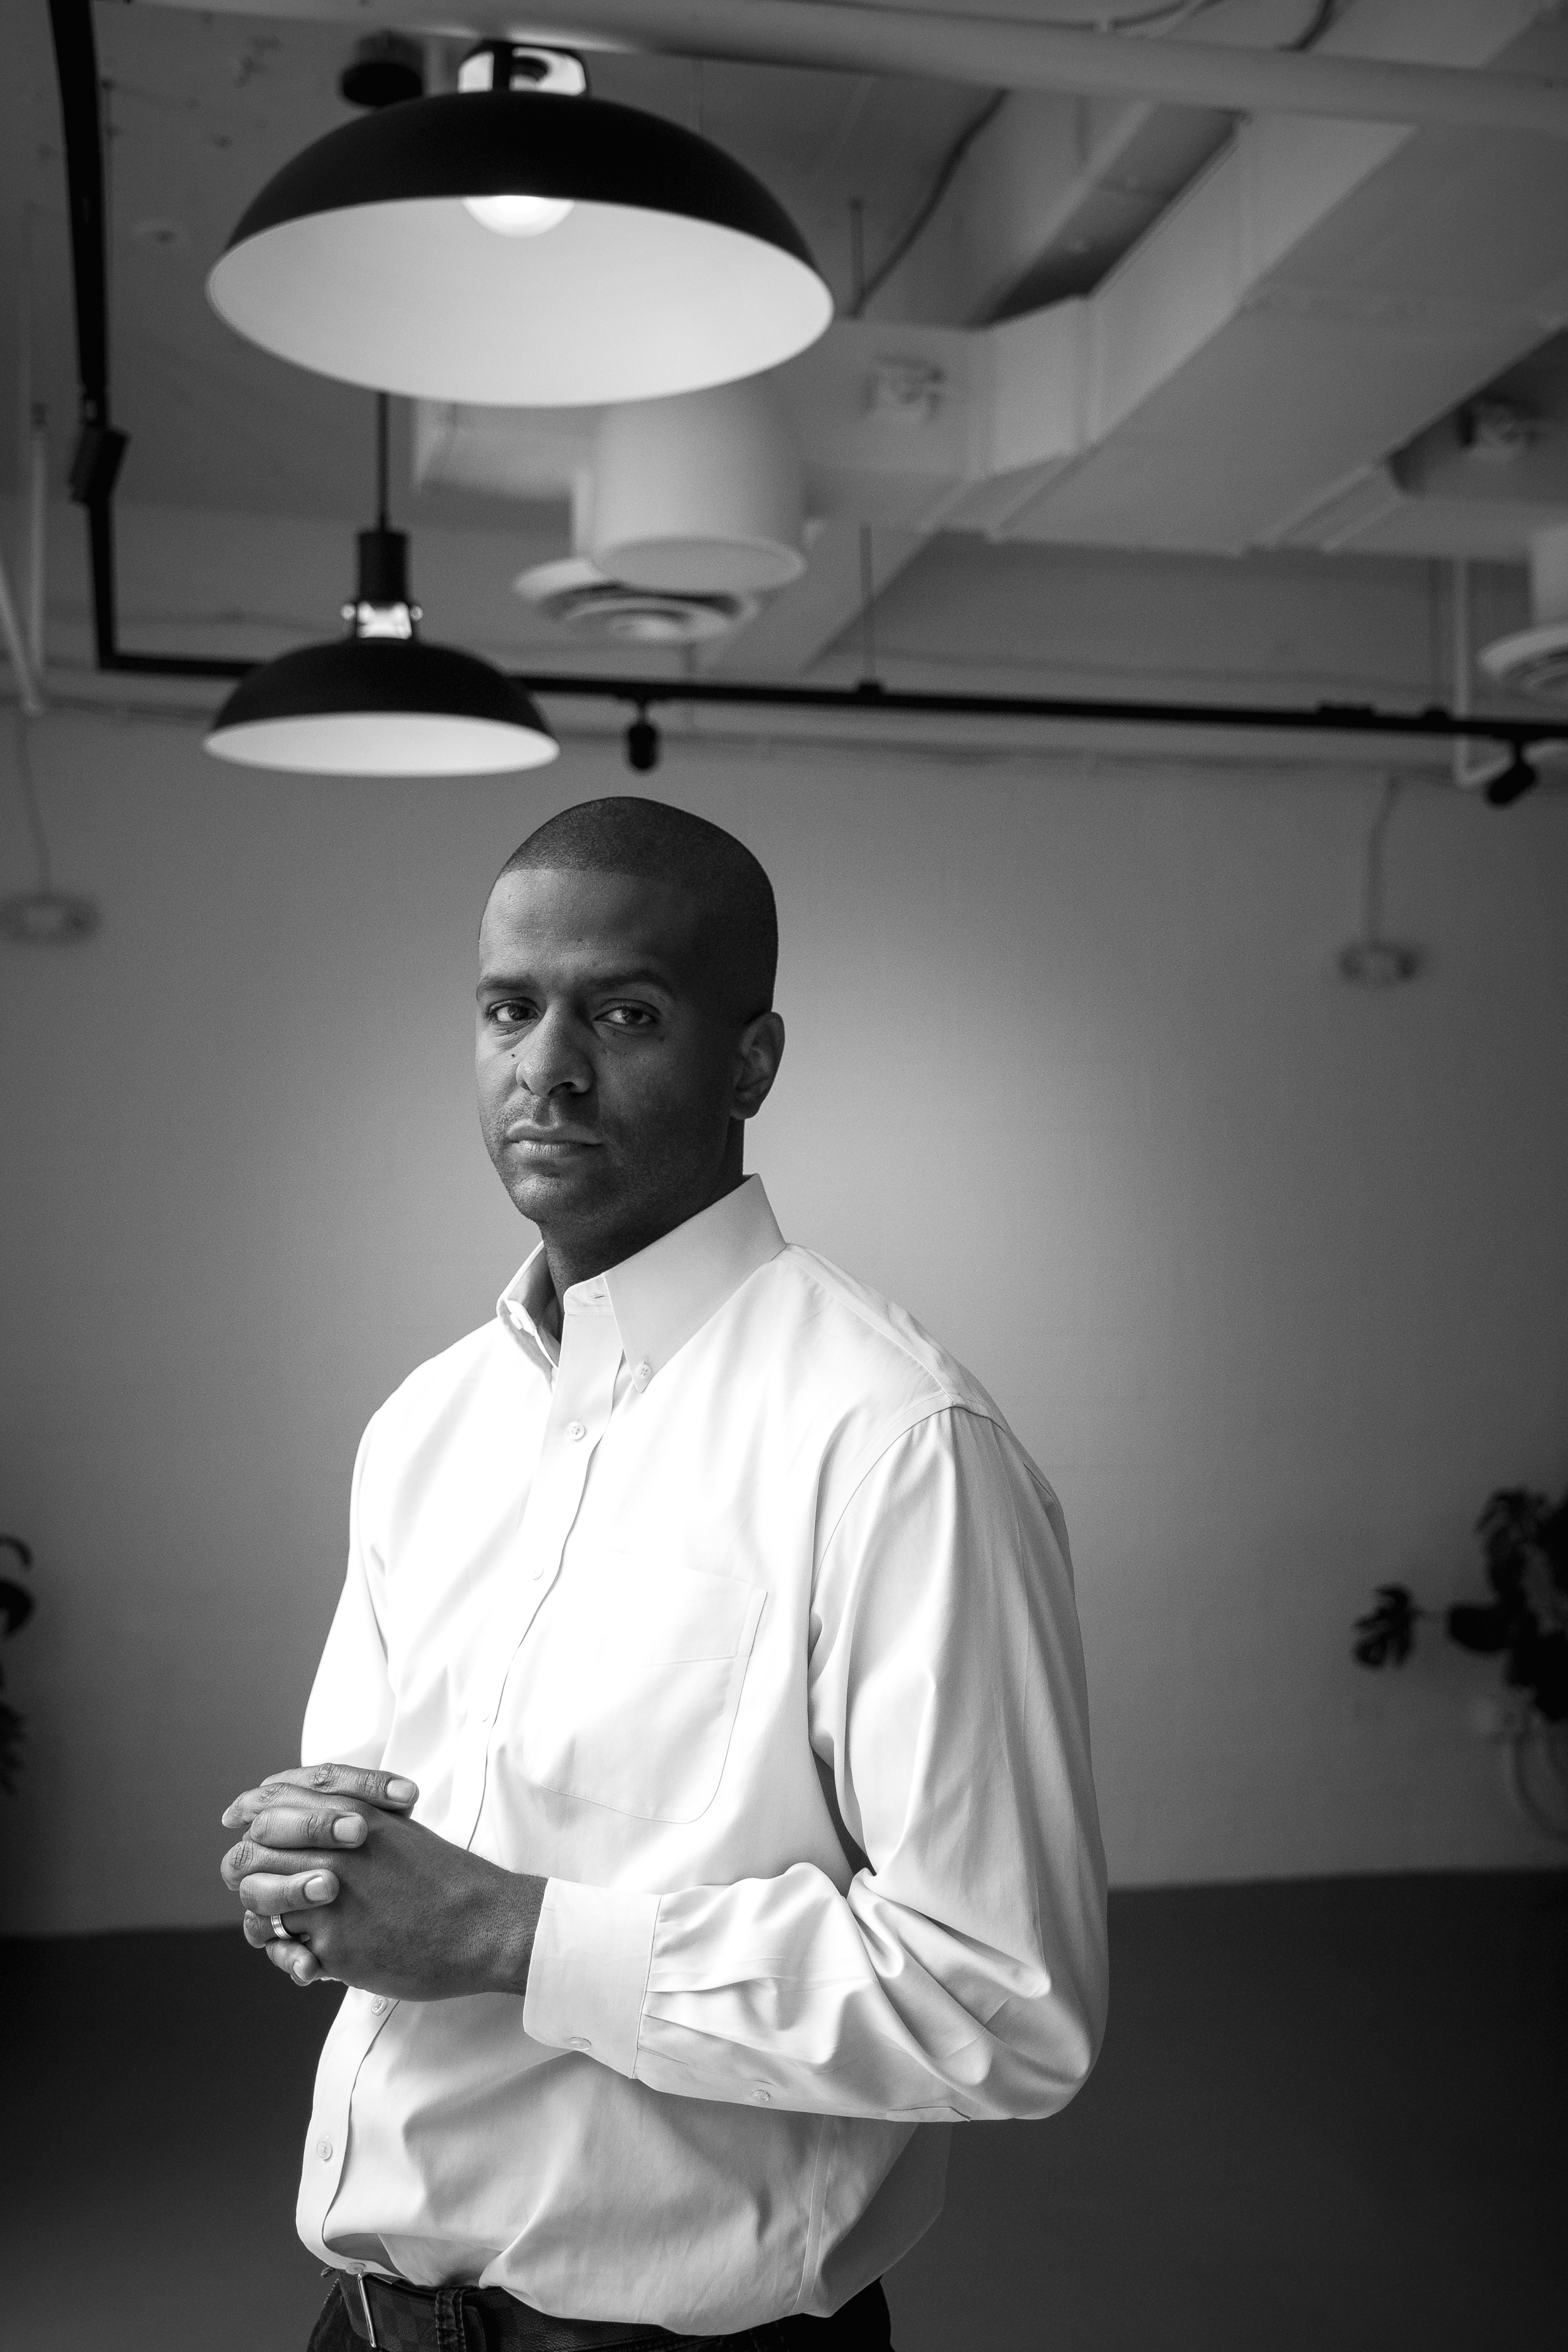 Black and white image of Bakari Sellers | an adult Black man in a white button-down shirt with his hands clasped in front of him.  He looks serious.  Two large light fixtures are above him.  